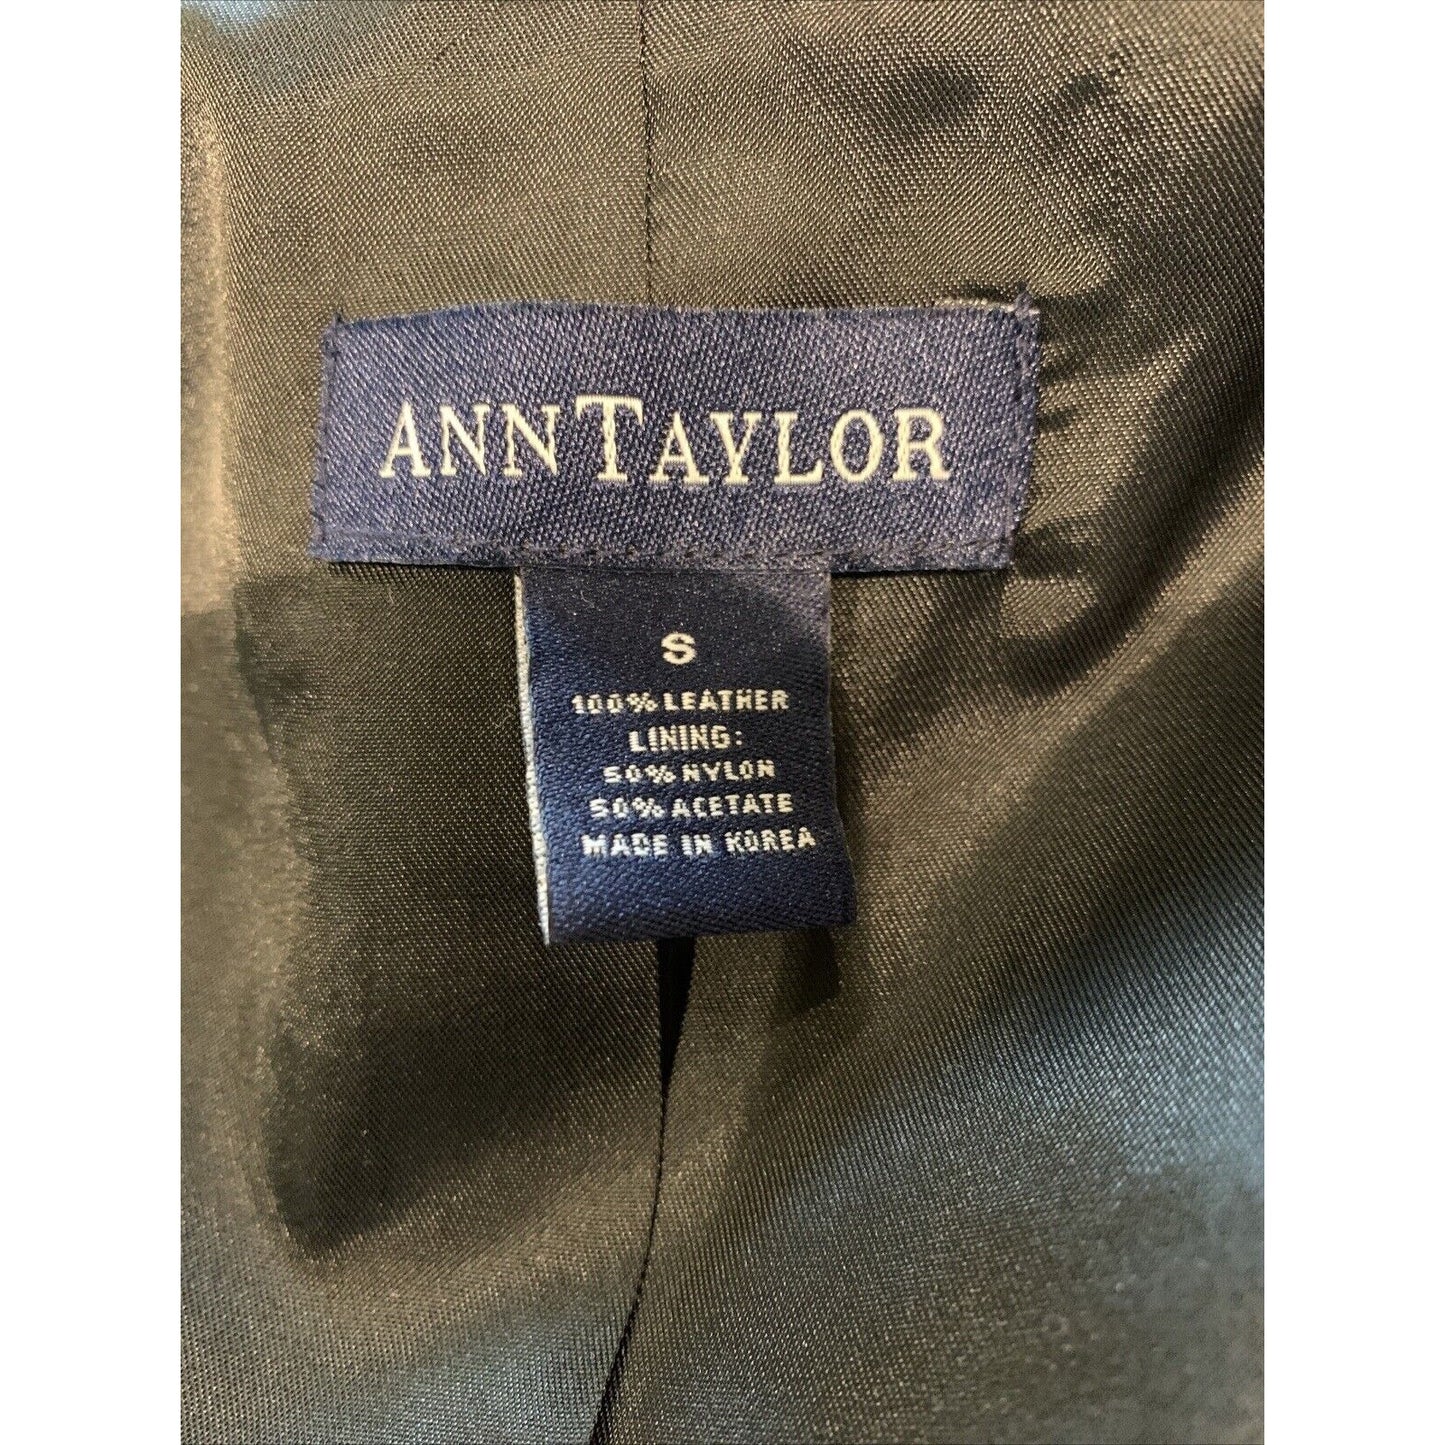 Closeup Of Clothing Label